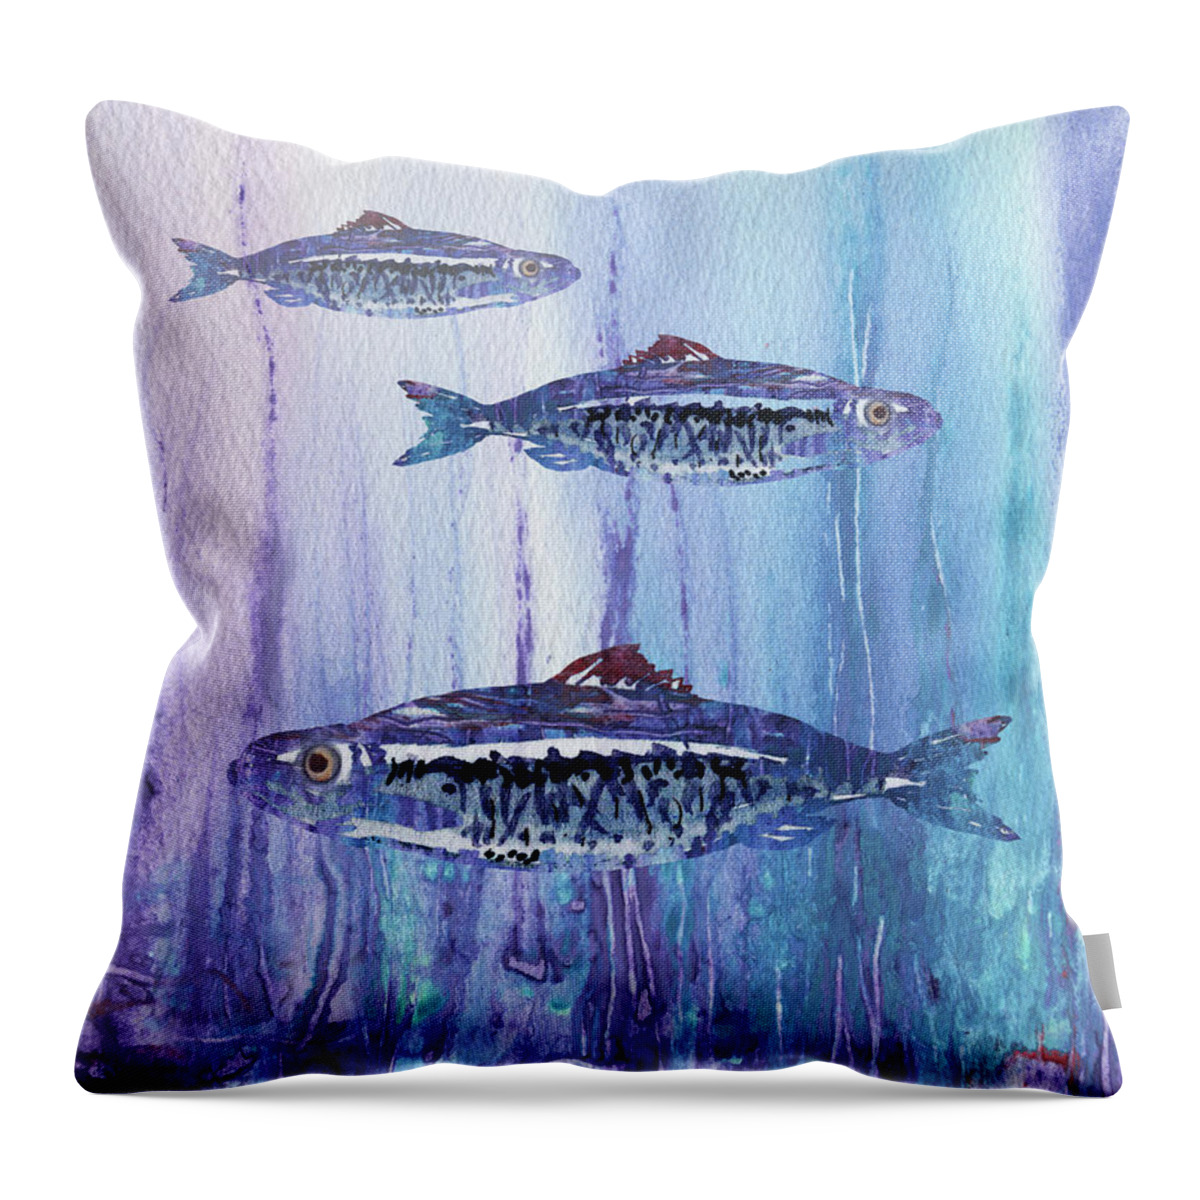 Watercolor Throw Pillow featuring the painting Blue School Of Fish Watercolor by Irina Sztukowski